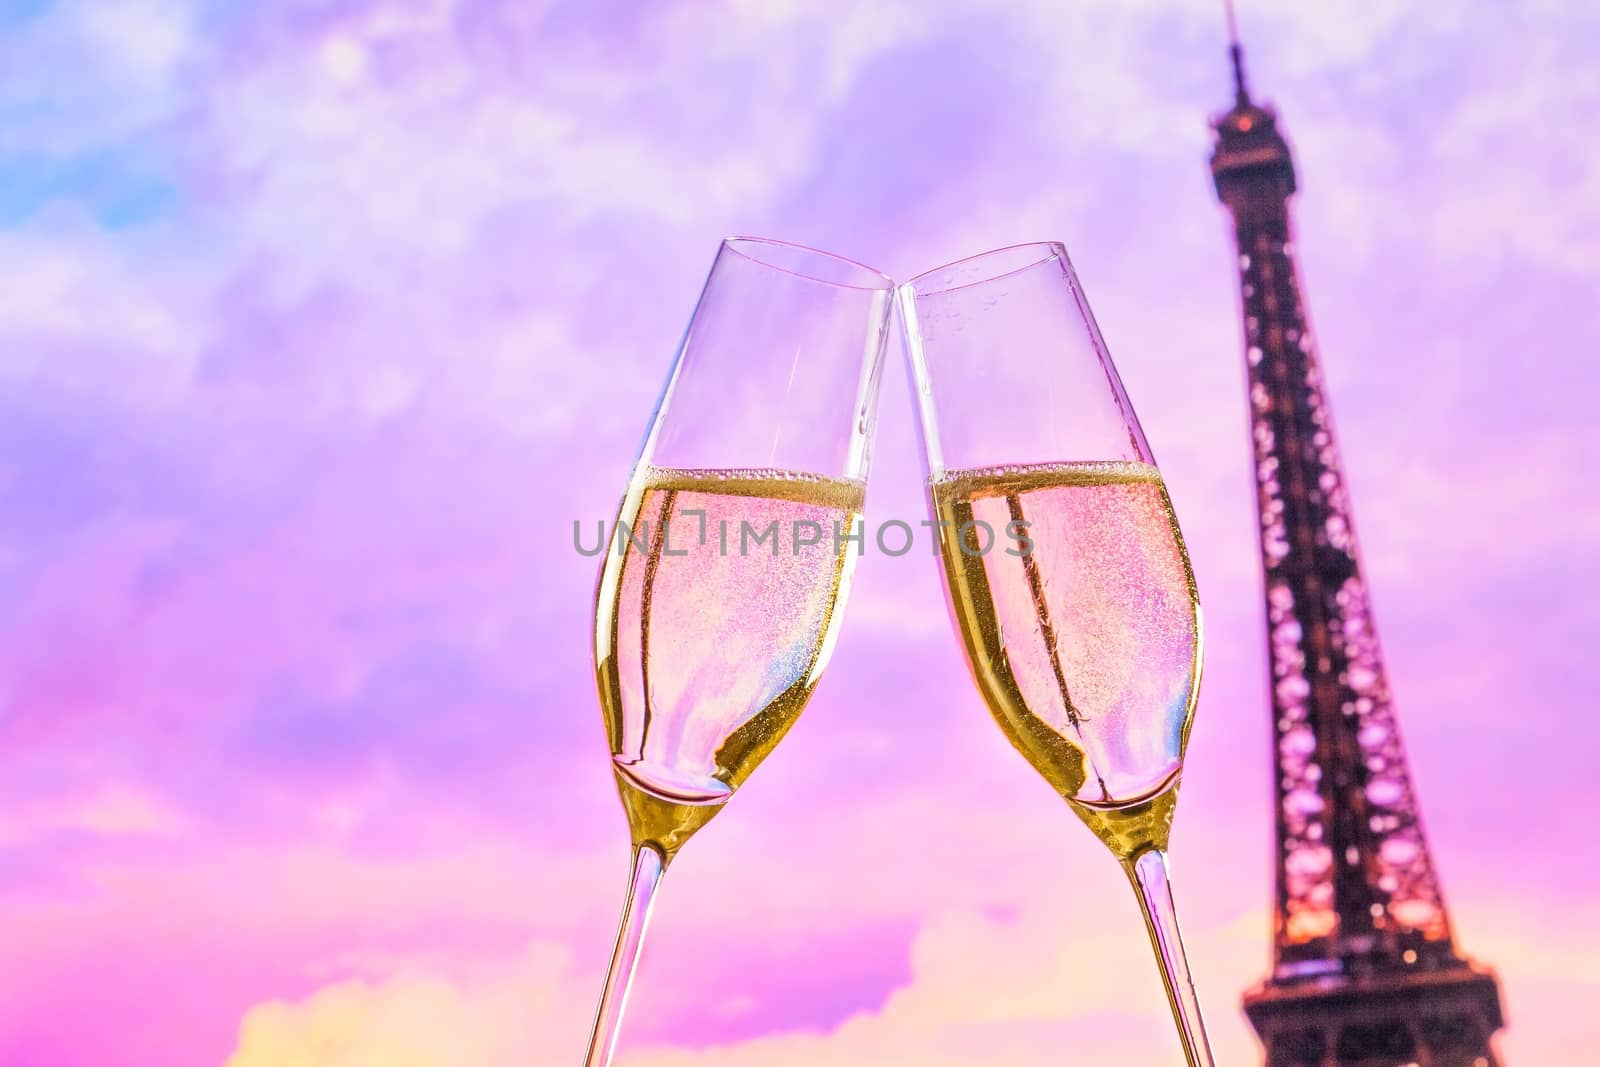 a pair of champagne flutes with golden bubbles make cheers on sunset blur tower Eiffel background valentine day concept